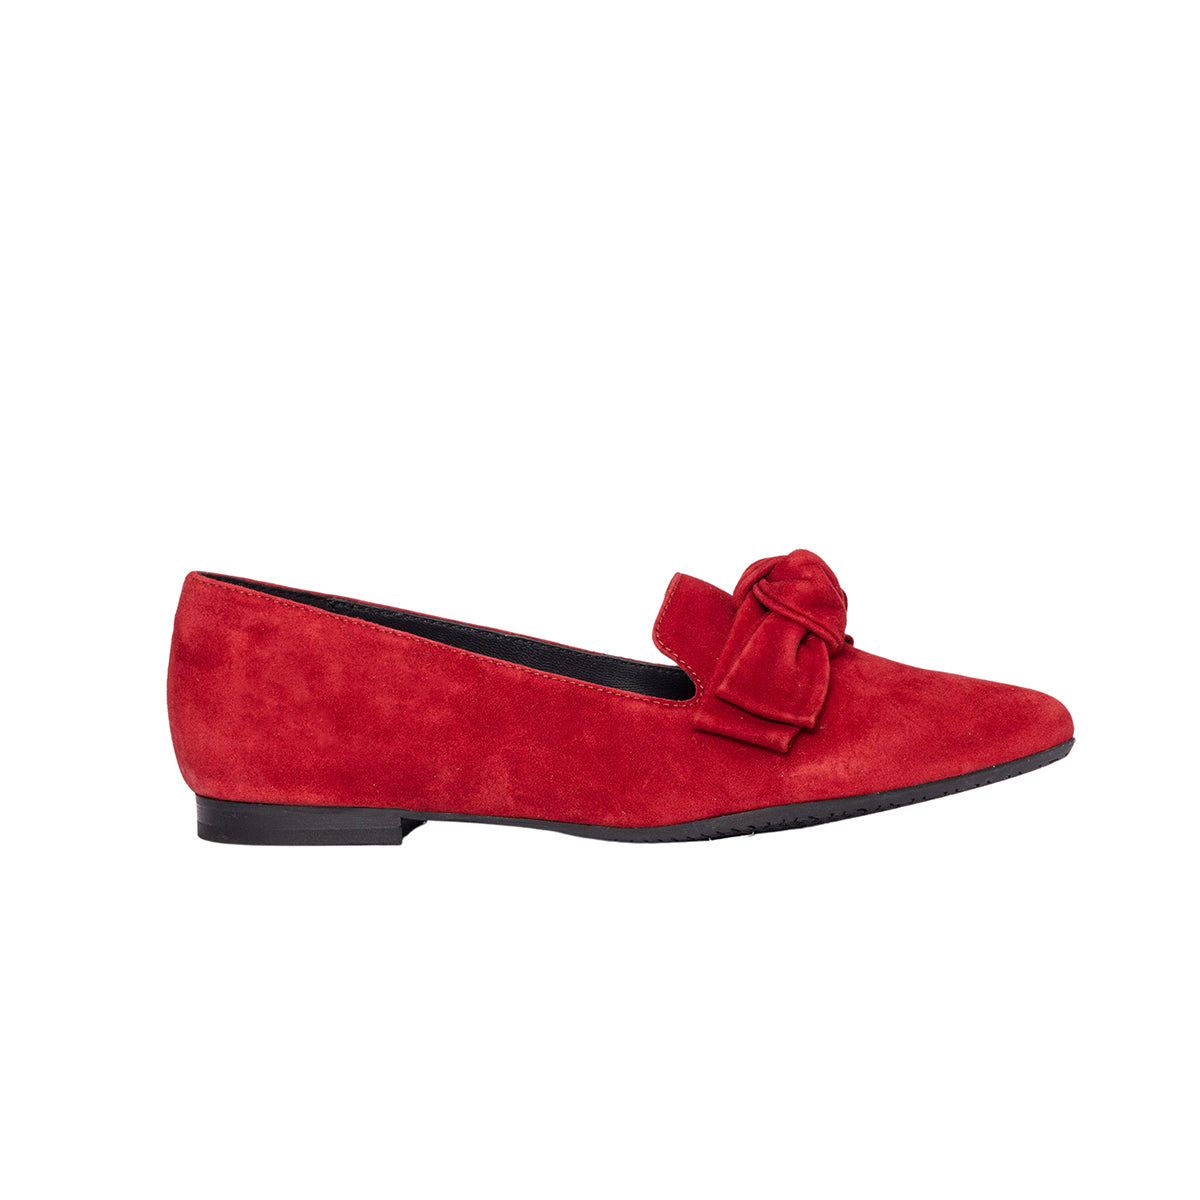 Ateliers Thea Cherry Suede Leather Slip on